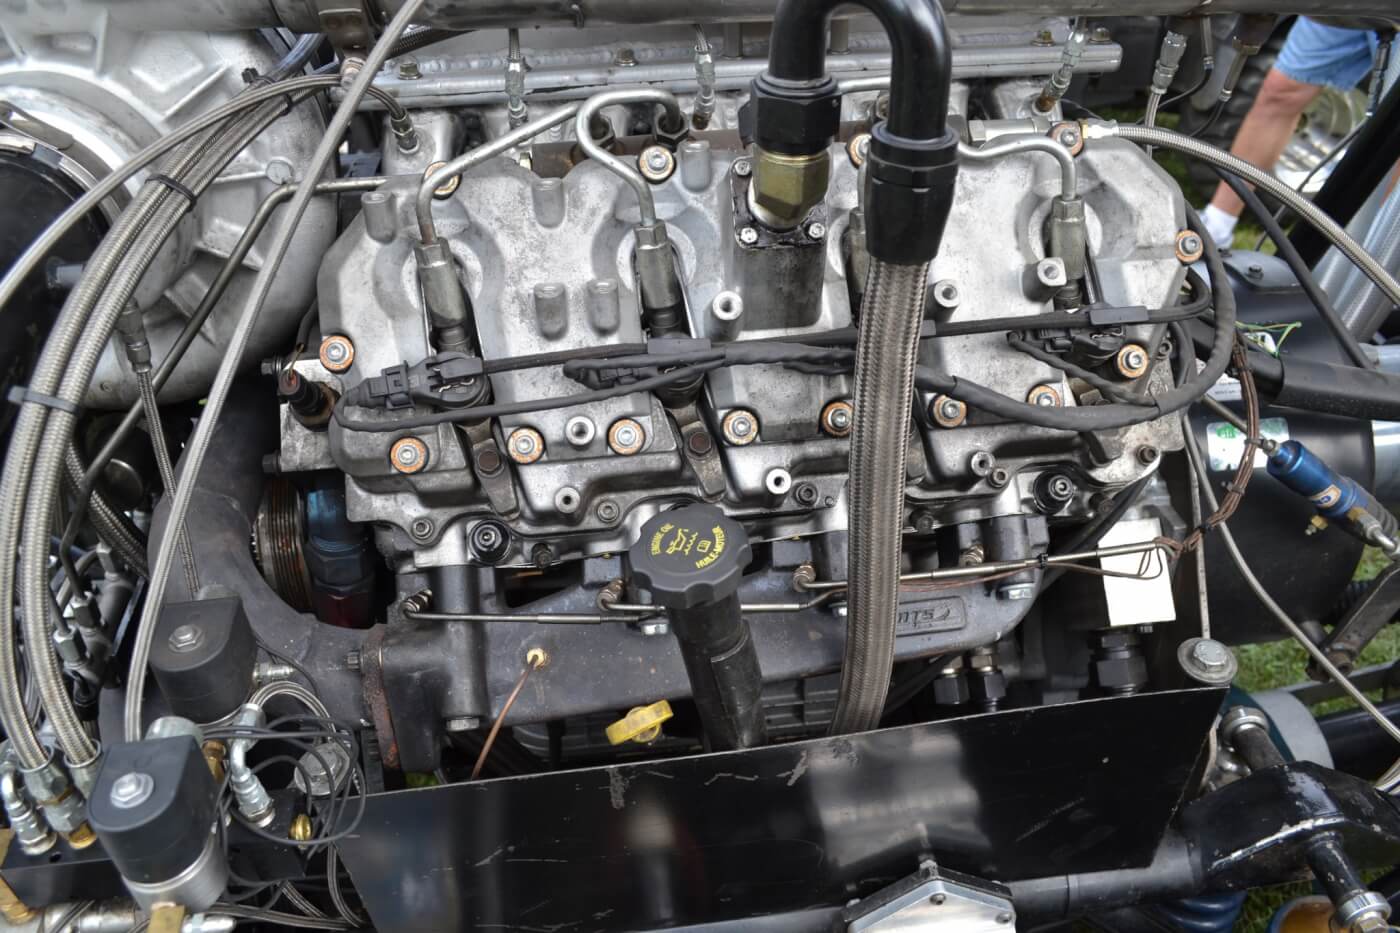 The long block in Kyle's rig is one of the stoutest Duramax engines we’ve ever seen. The block is from a 2011 LML, is filled, and equipped with ARP main studs. The engine also has a one-off Sonny Bryant crank, Carrillo connecting rods, and 15:1 Mahle pistons. Surprisingly, the block and Wagler Racing CNC cylinder heads are not fire-ringed, but do have custom 625 studs holding everything together along with an OEM head gasket. Exhaust manifolds are from ATS, and the AFO cam is a custom grind from Crank It Up Diesel. Smith Brothers pushrods and Wagler Racing valve springs with factory rocker arms round out the long block.